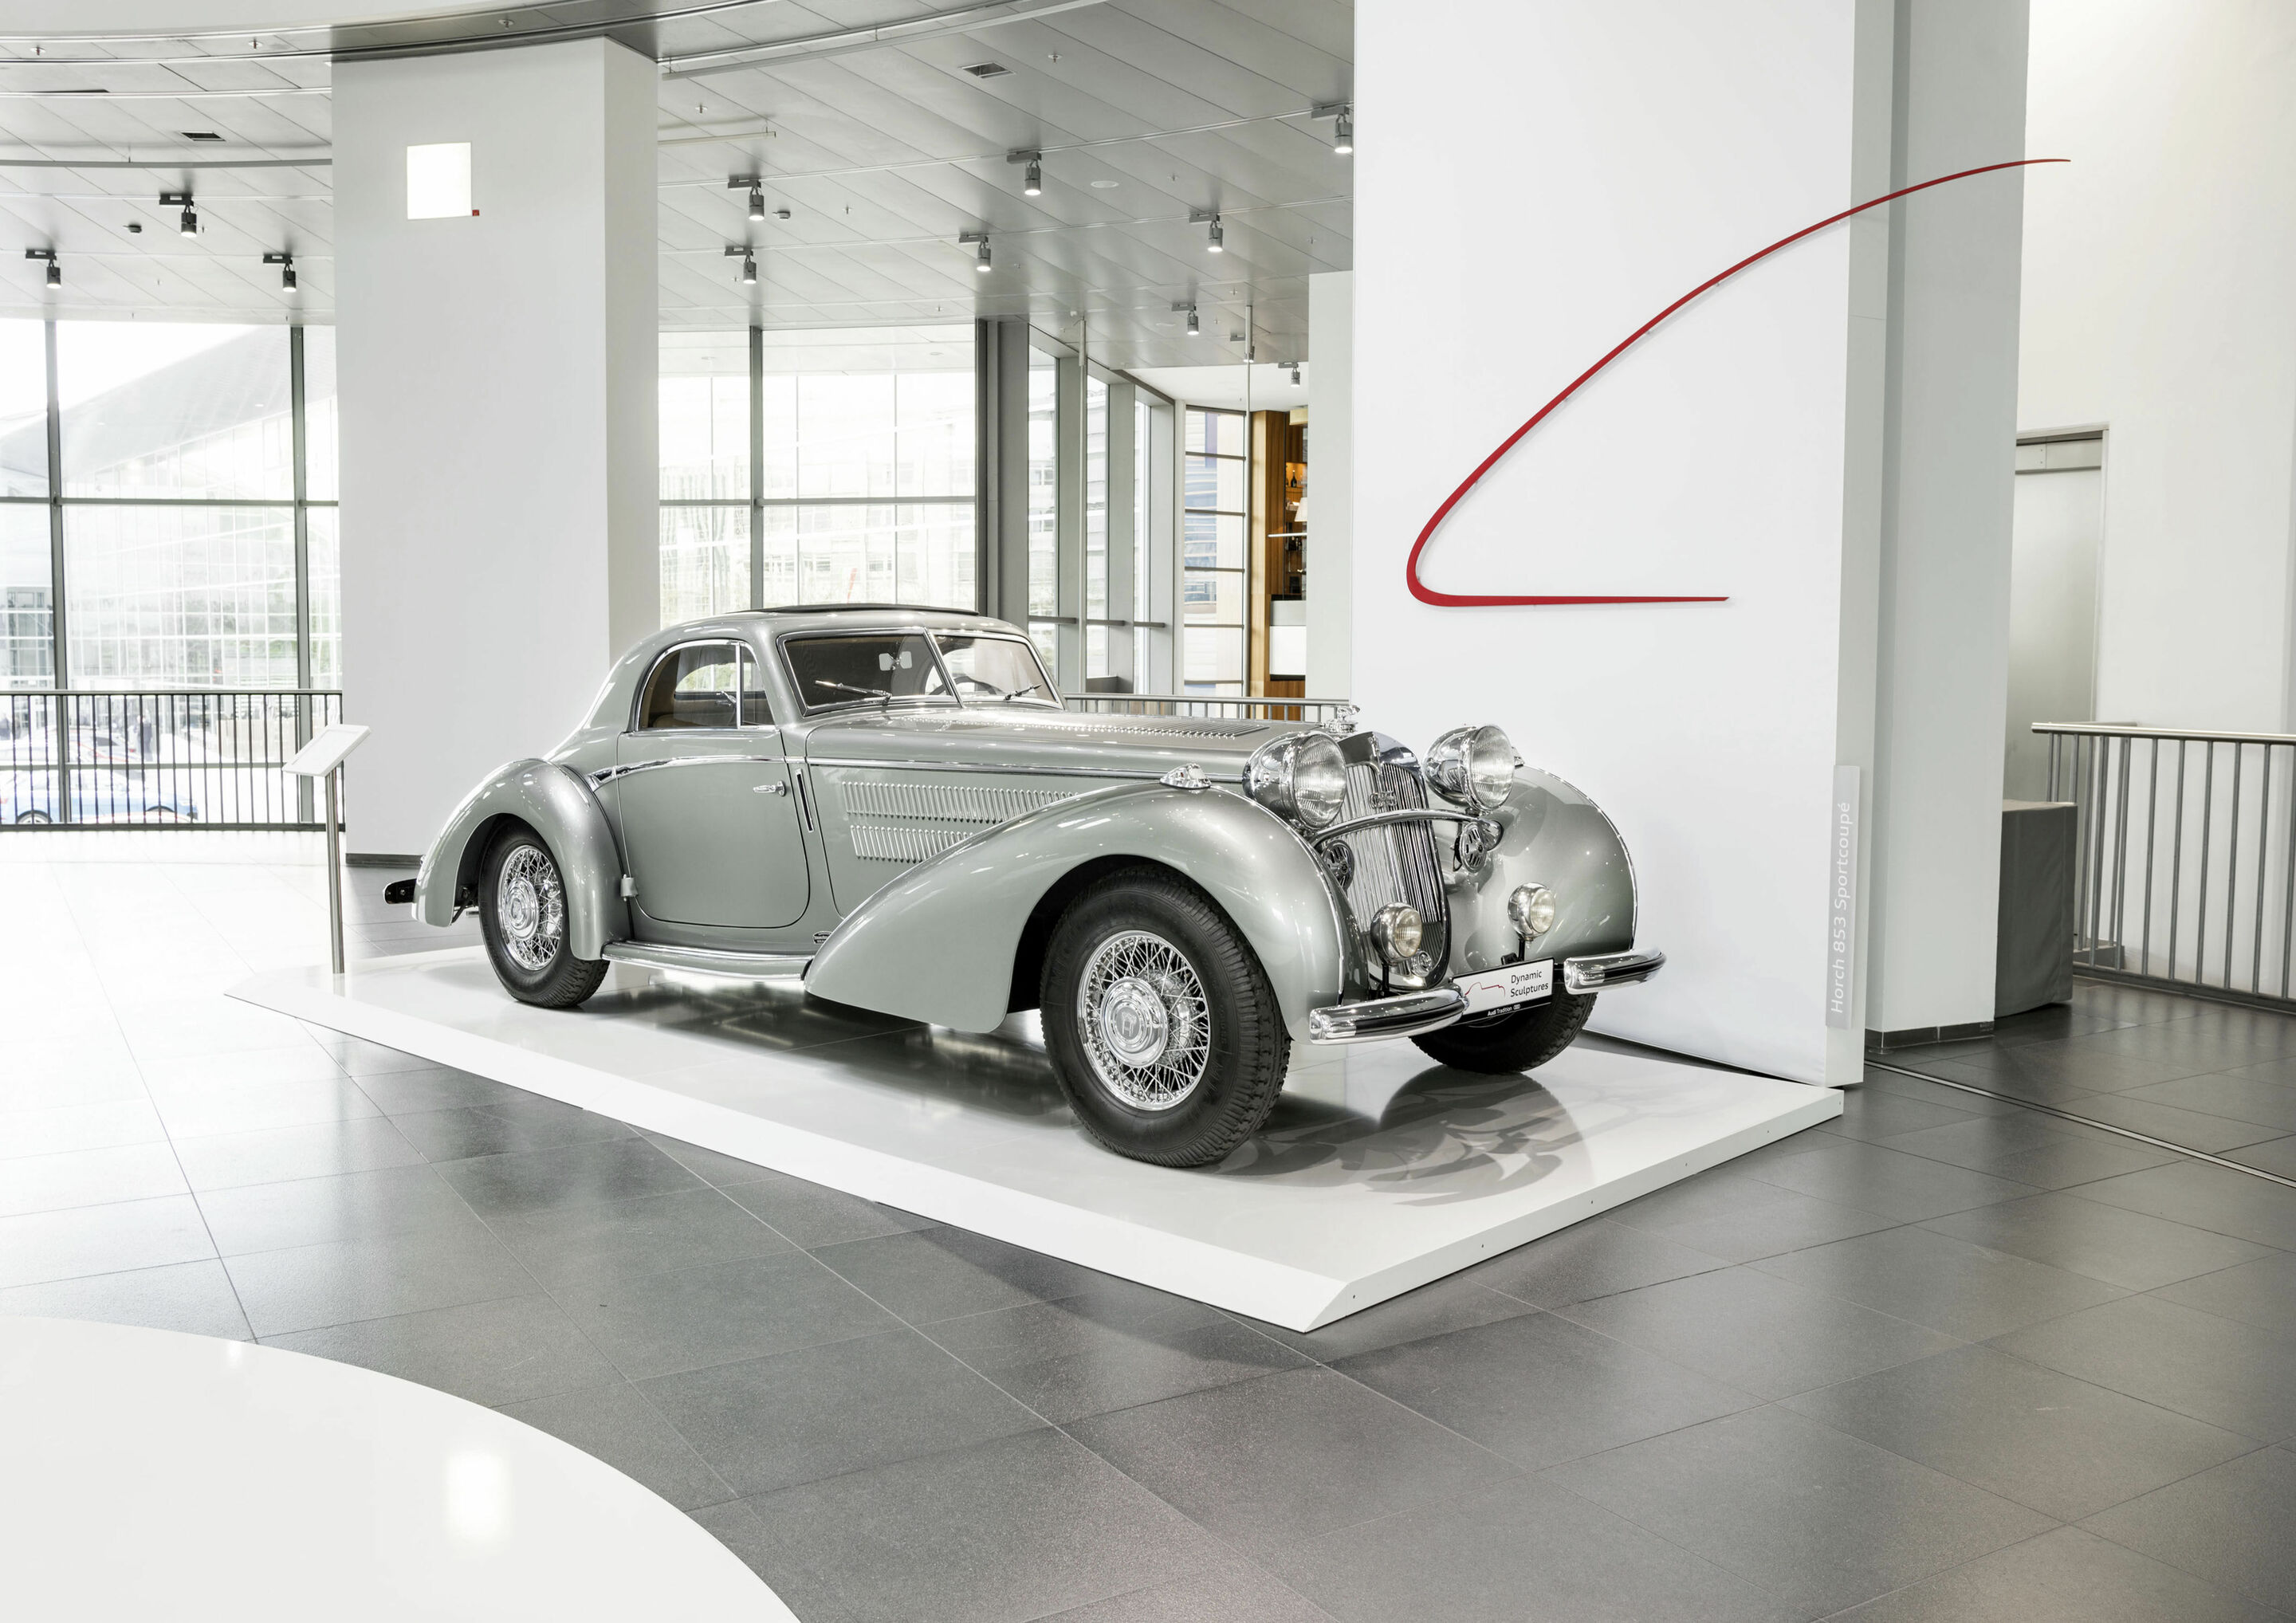 Horch 853 “Manuela”: the unique car has been built especially for Bernd Rosemeyer, motorsports superstar of the 1930s. The original car is lost; the museum presents an exact replica.